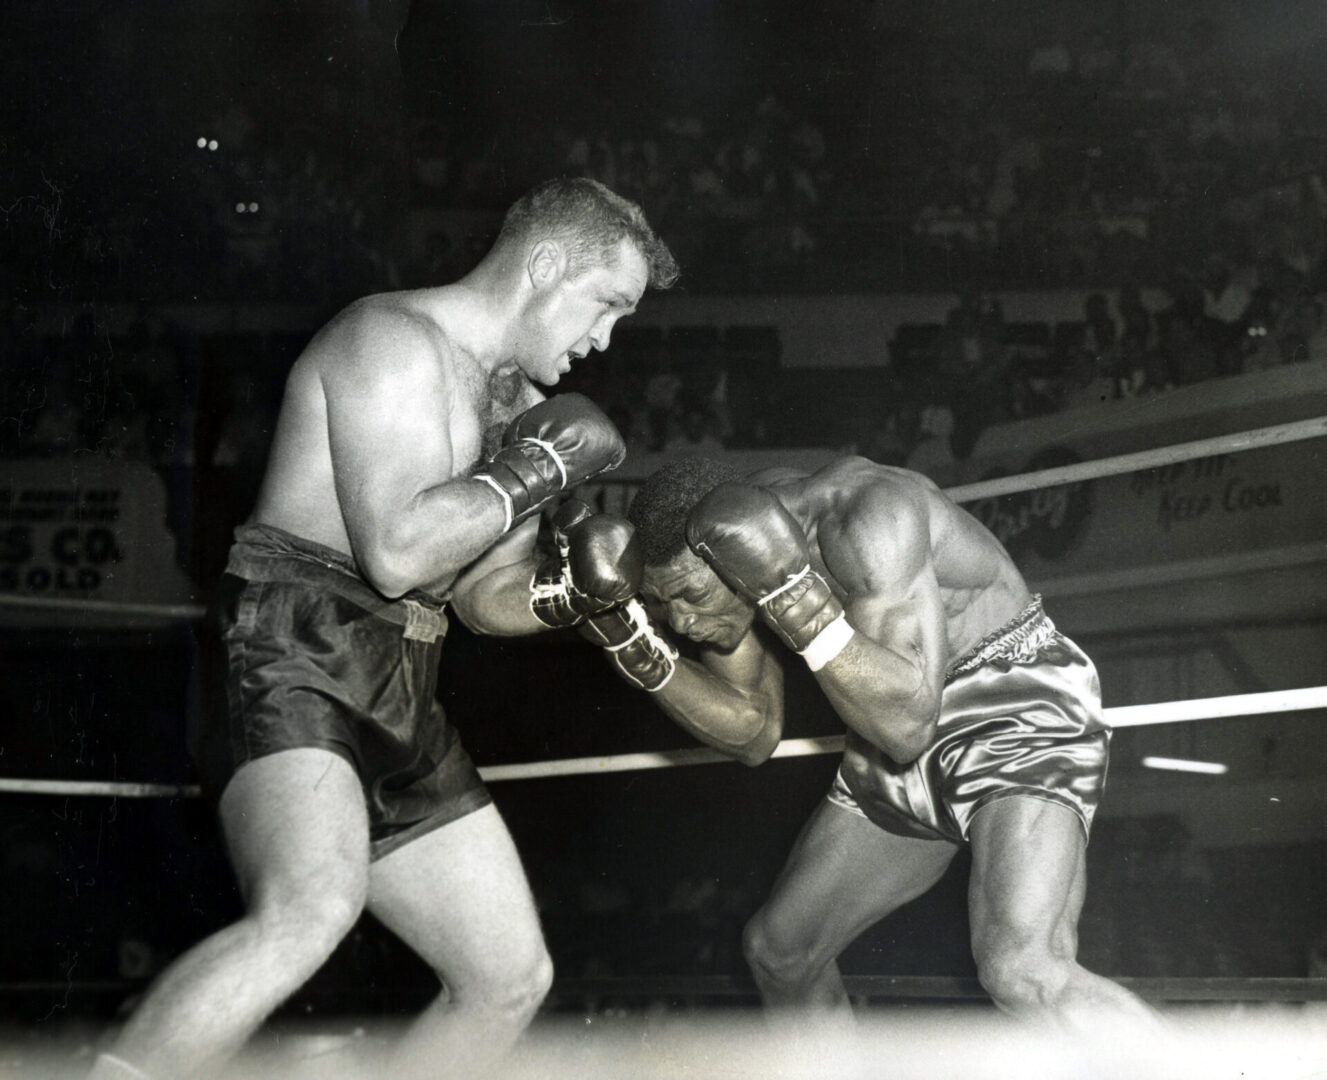 A man in black trunks and gloves is boxing.